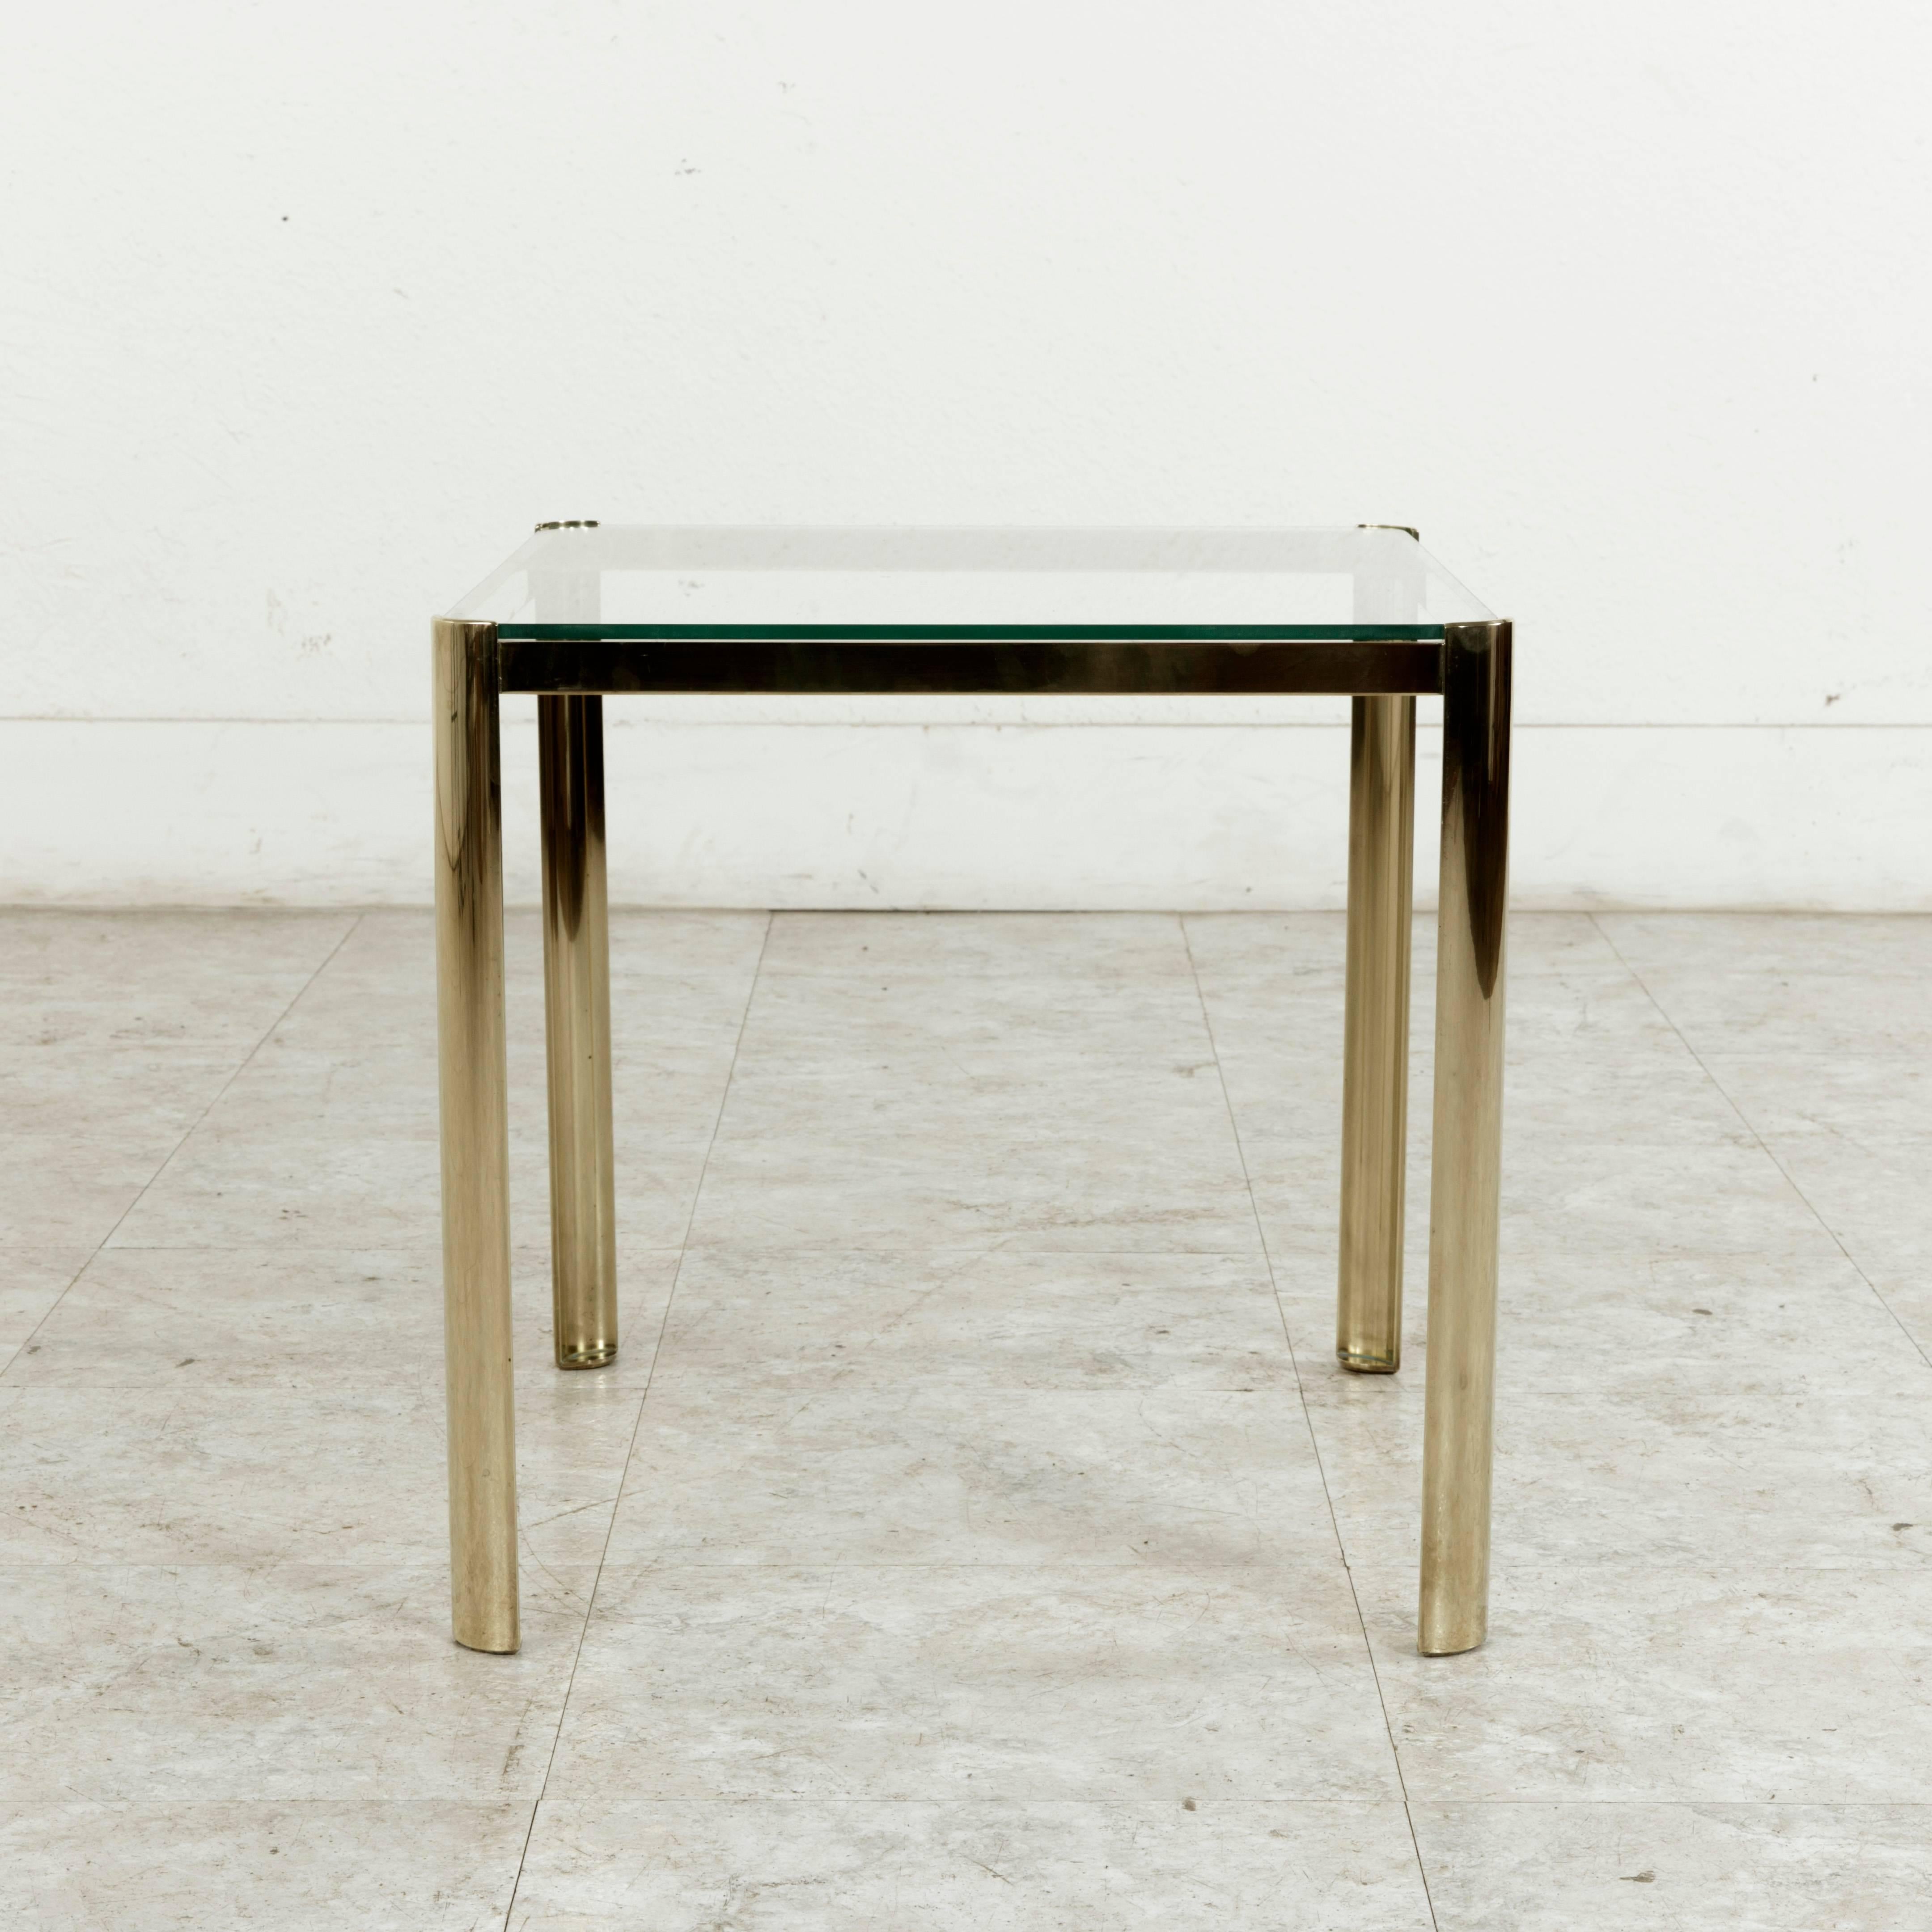 20th Century Midcentury French Bronze and Glass Side Table by Jacques Quinet for Broncz